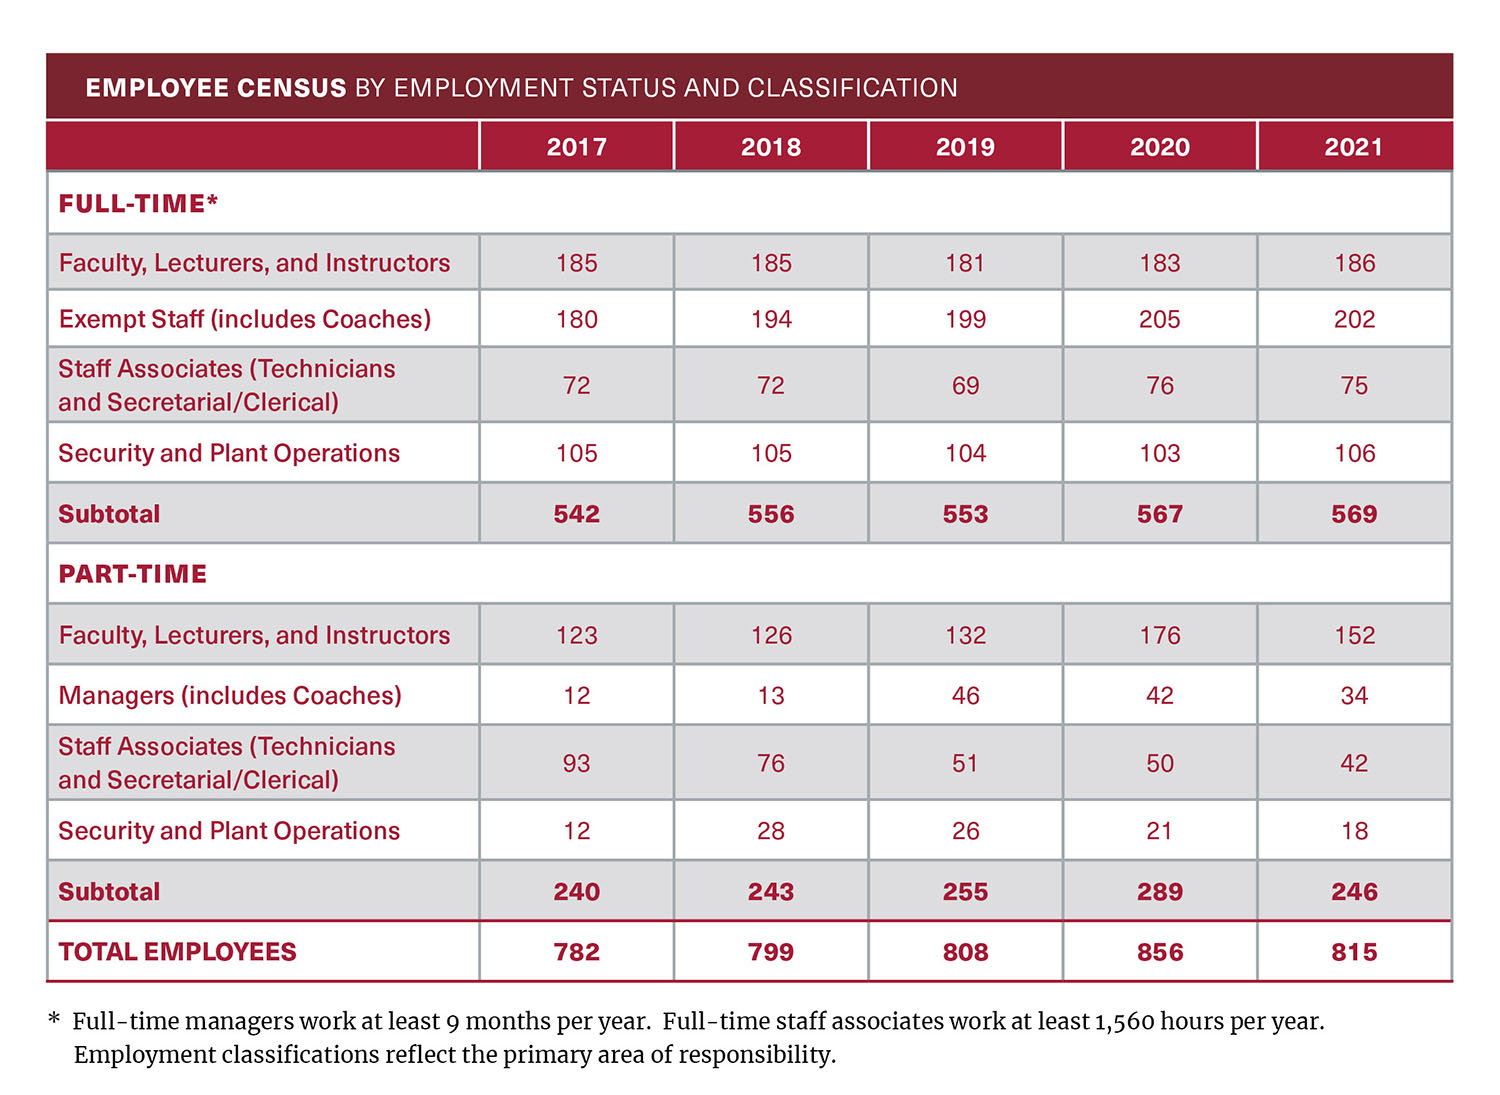 Chart of employee census by employment status and classification.